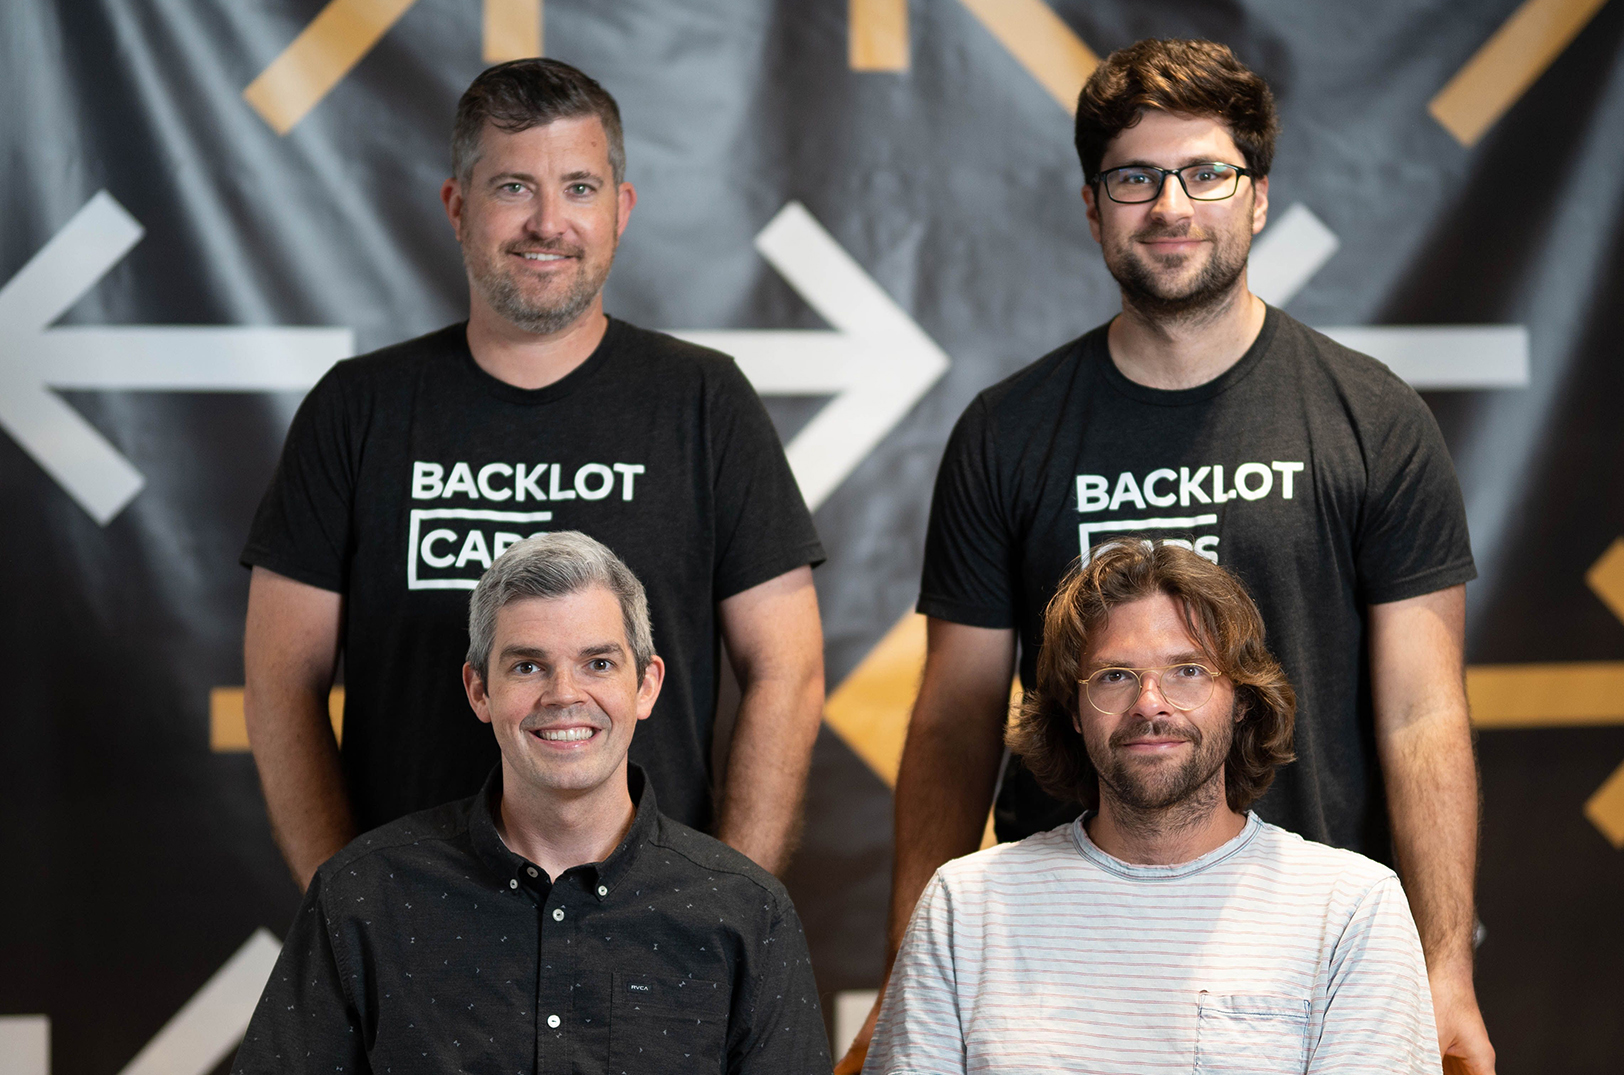 BacklotCars completes historic $425M exit, joining ‘power and fierce entrepreneurial spirit’ of KAR Global